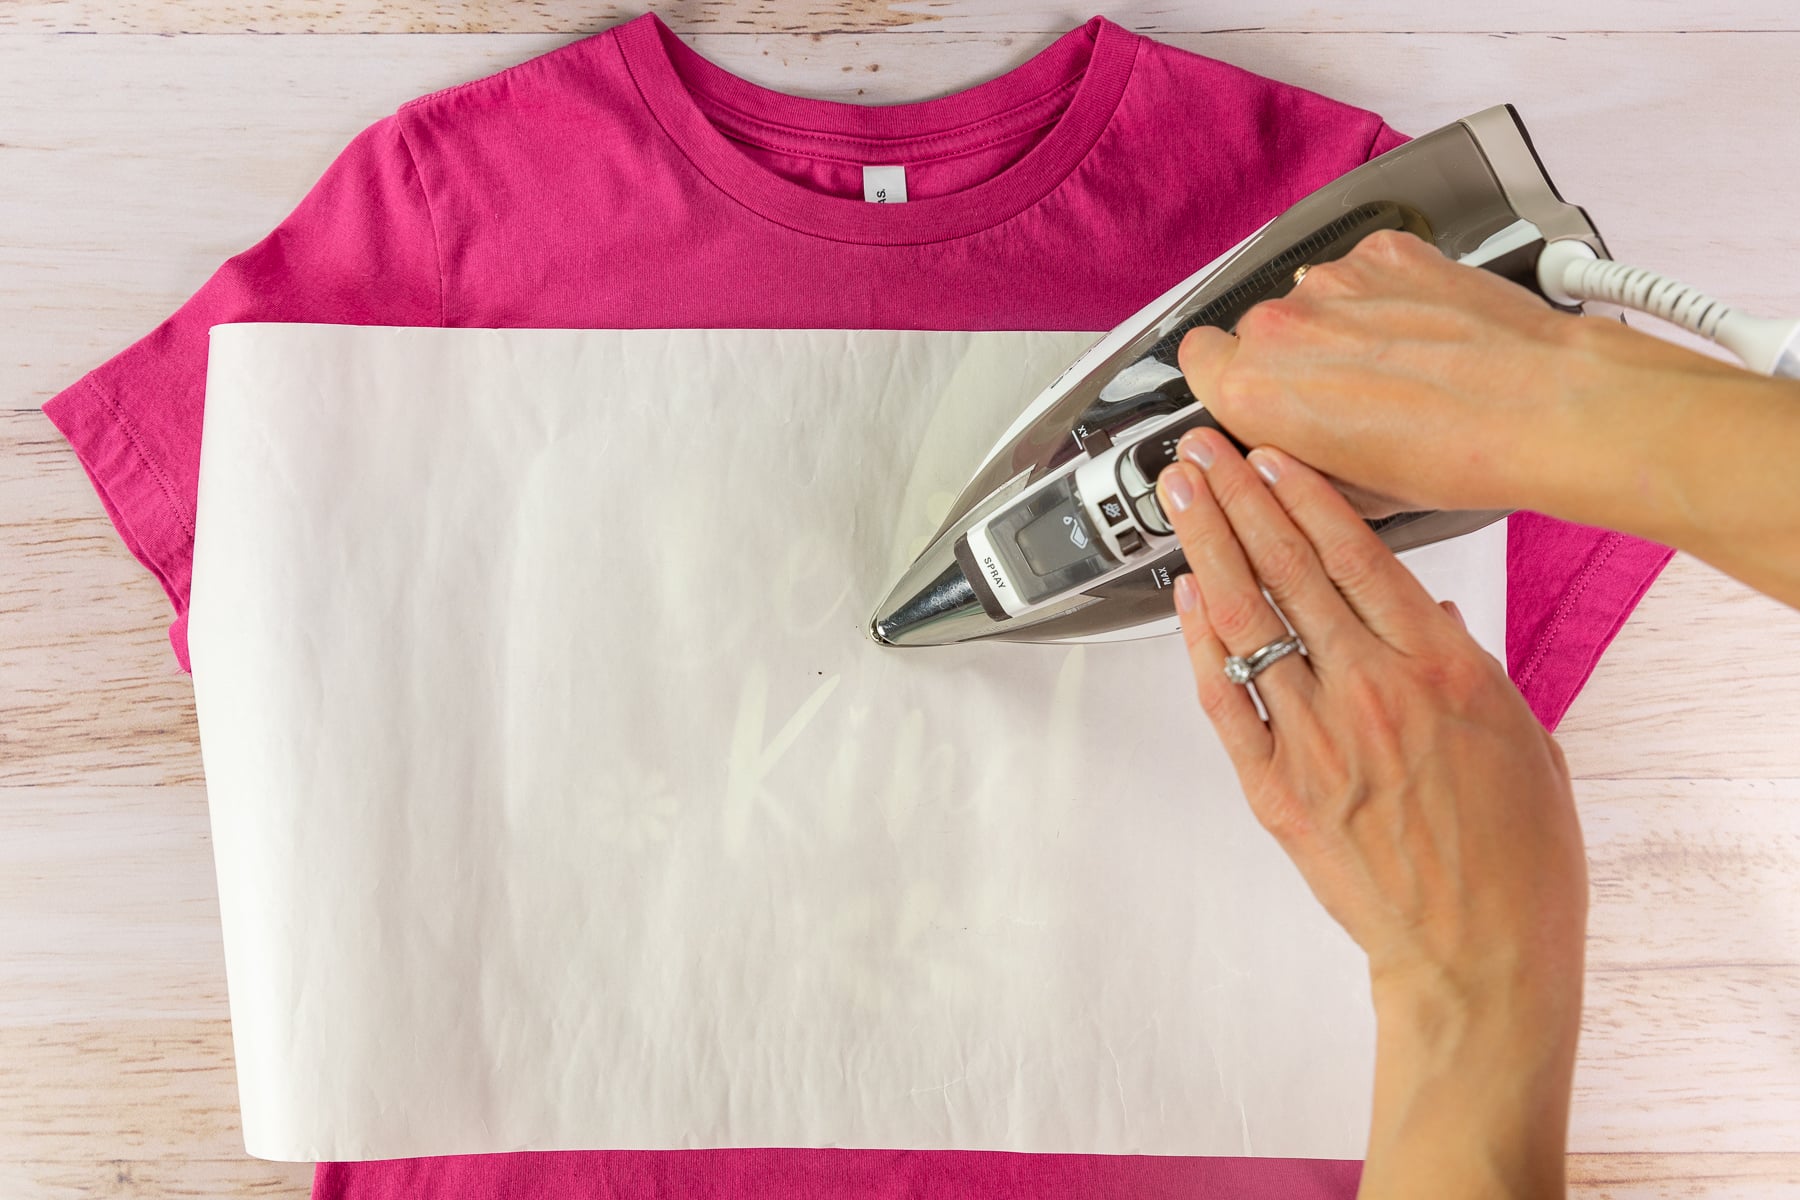 Pressing an HTV design onto a shirt with a household iron.